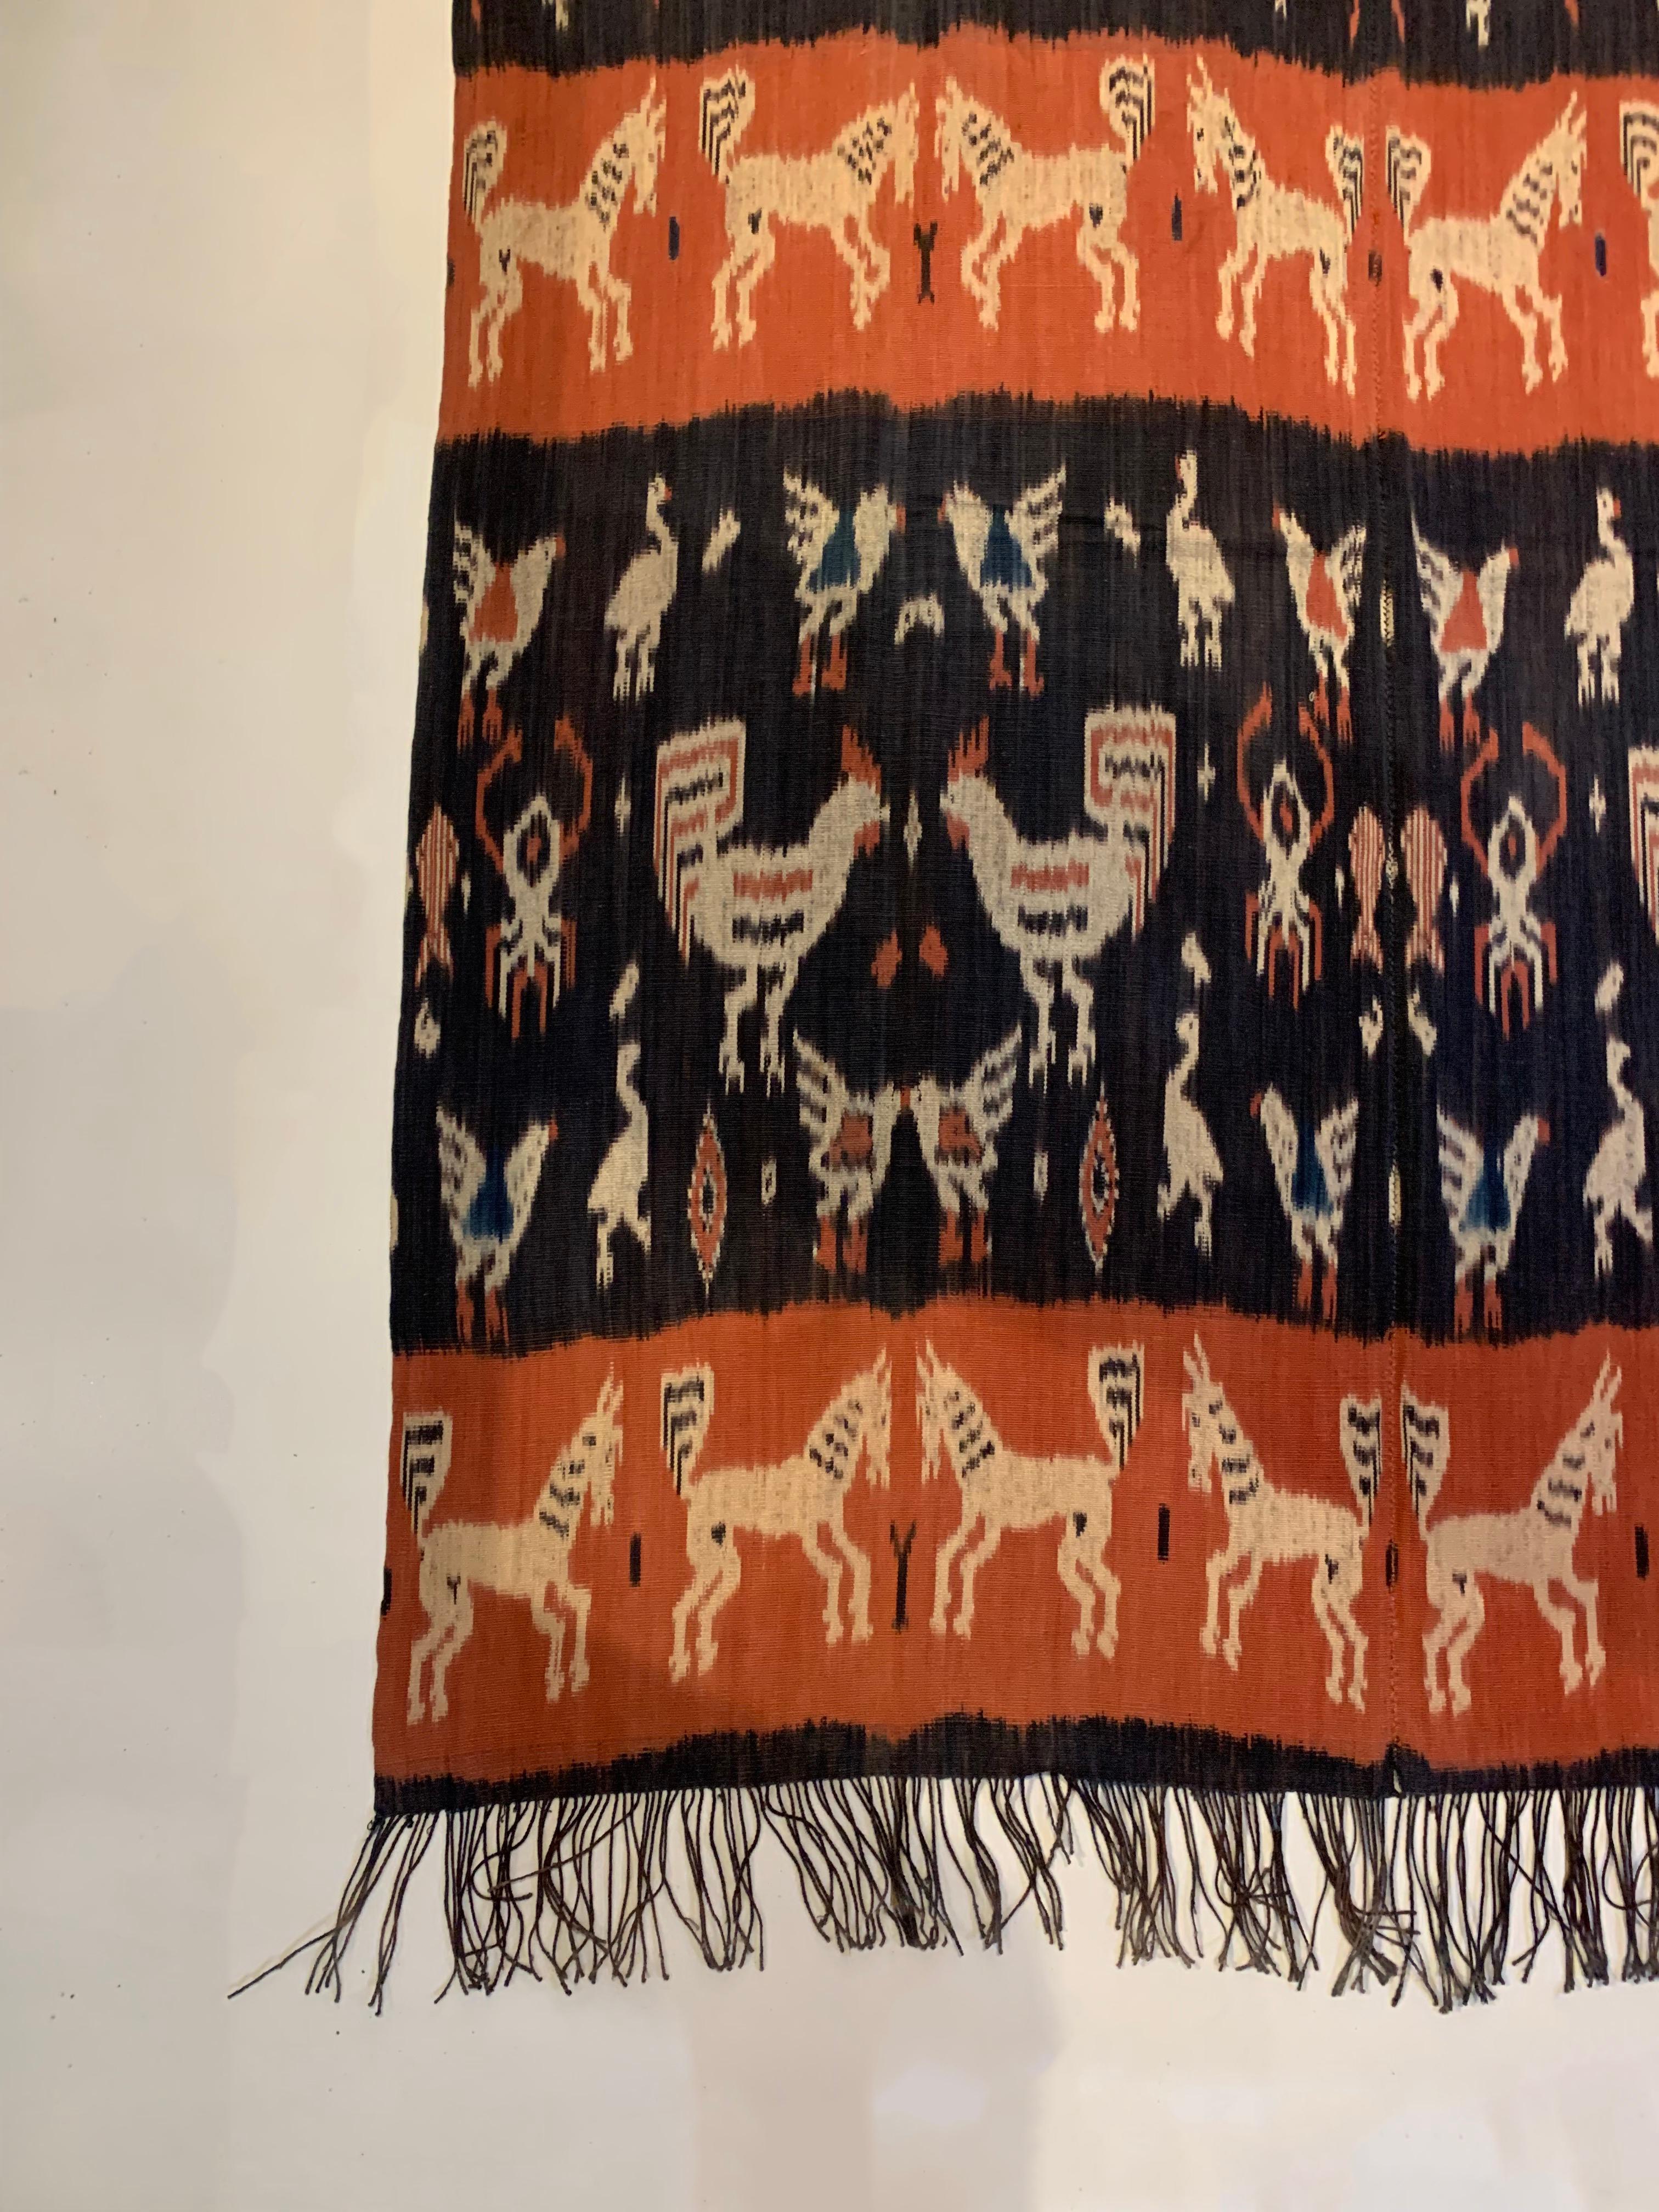 This Ikat textile originates from the Island of Sumba, Indonesia. It is hand-woven using naturally dyed yarns via a method passed on through generations. It features a stunning array of distinct tribal patterns and motifs. Motifs include chickens &